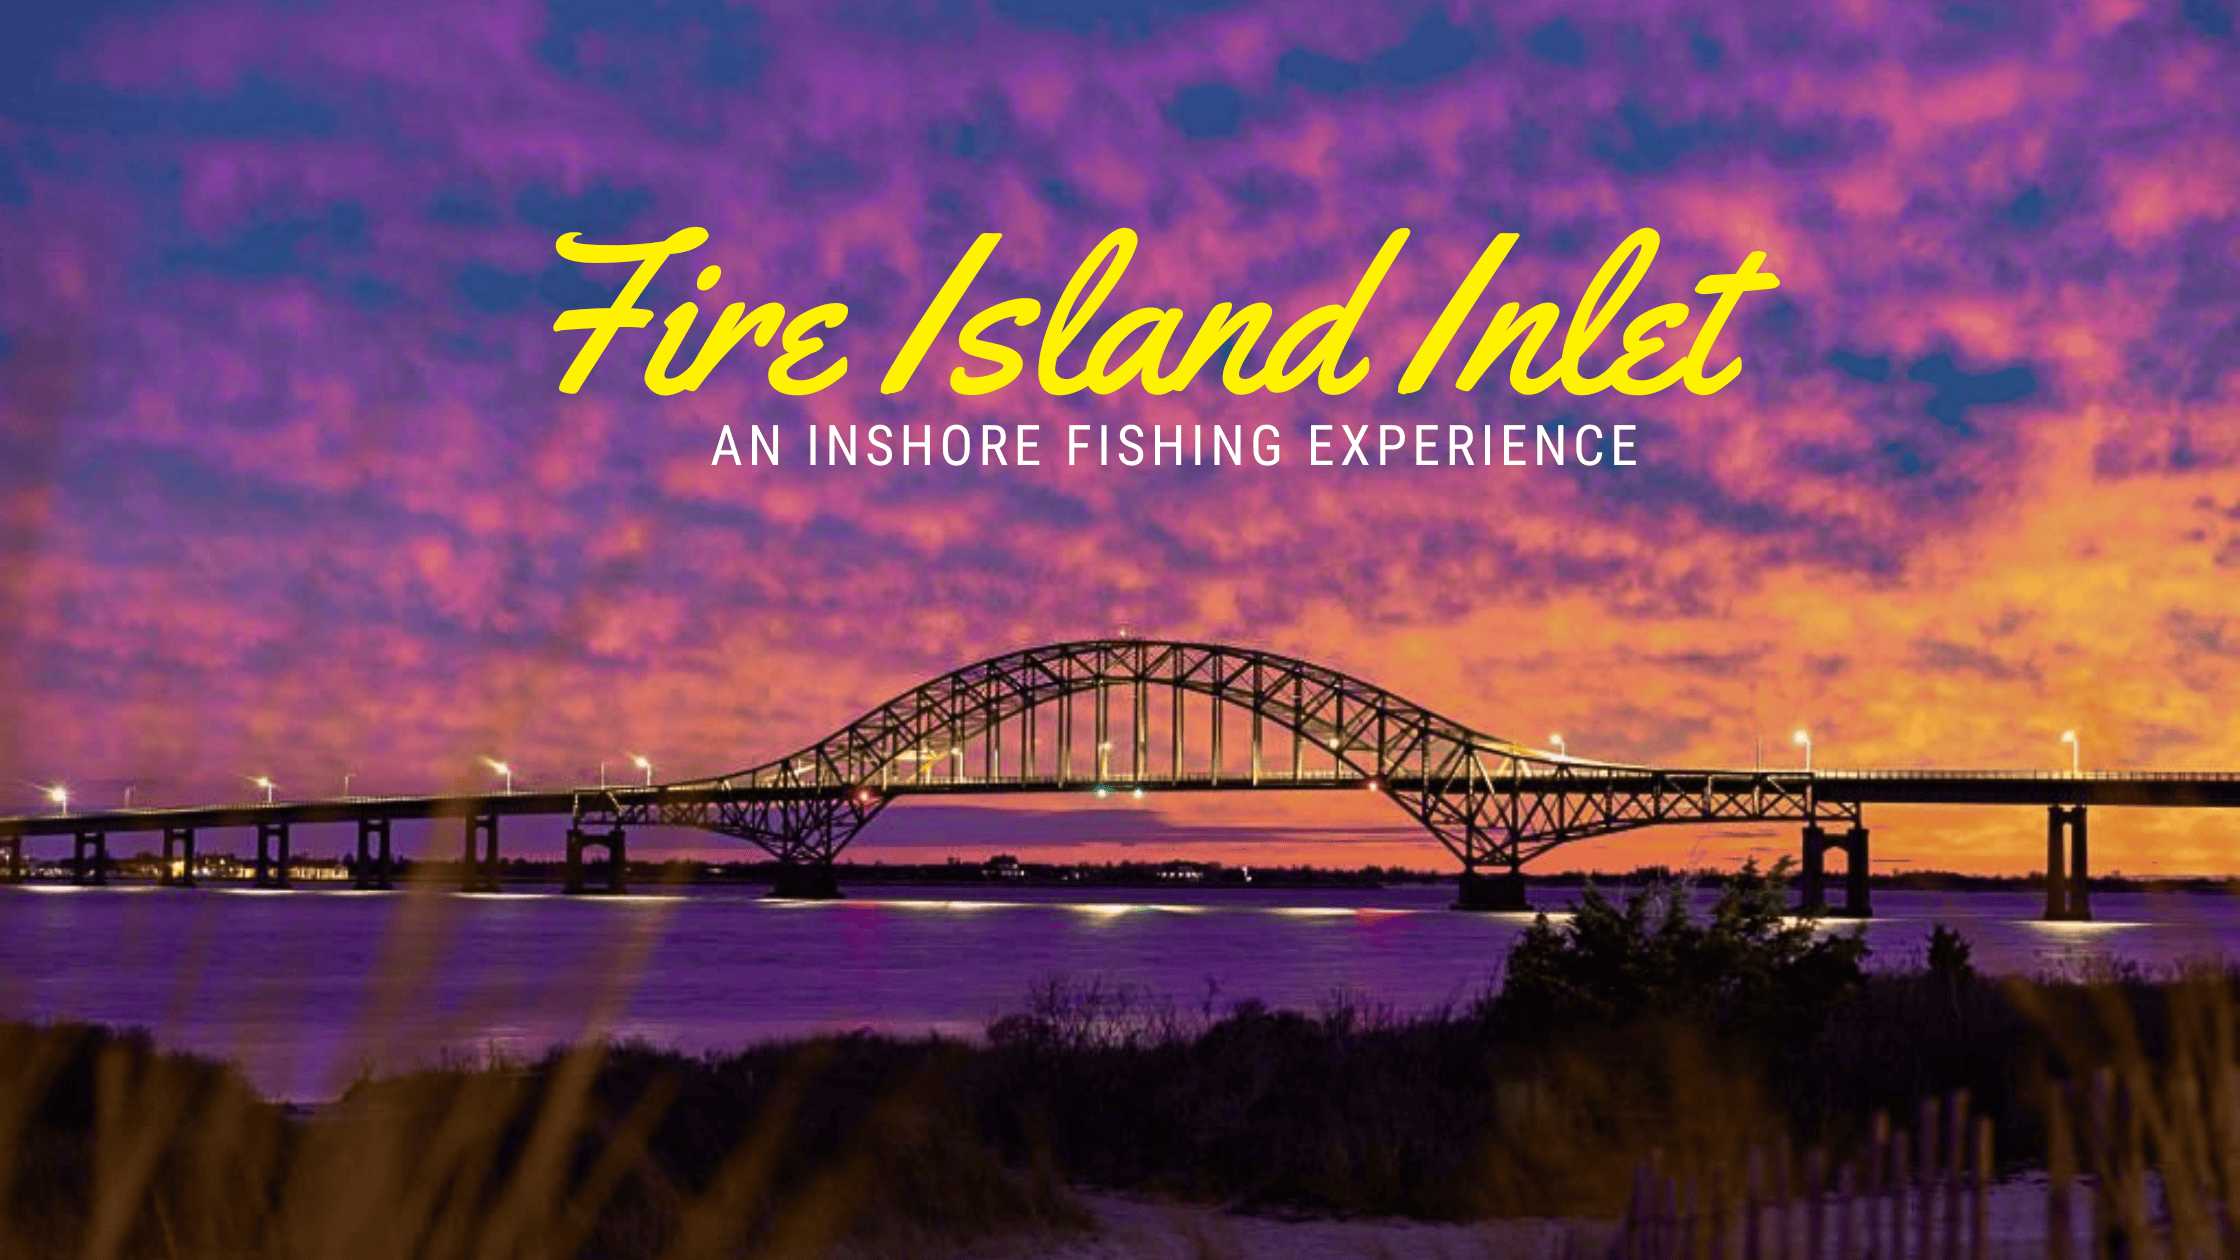 explore top fishing spots in Long Island at Fire Island Inlet